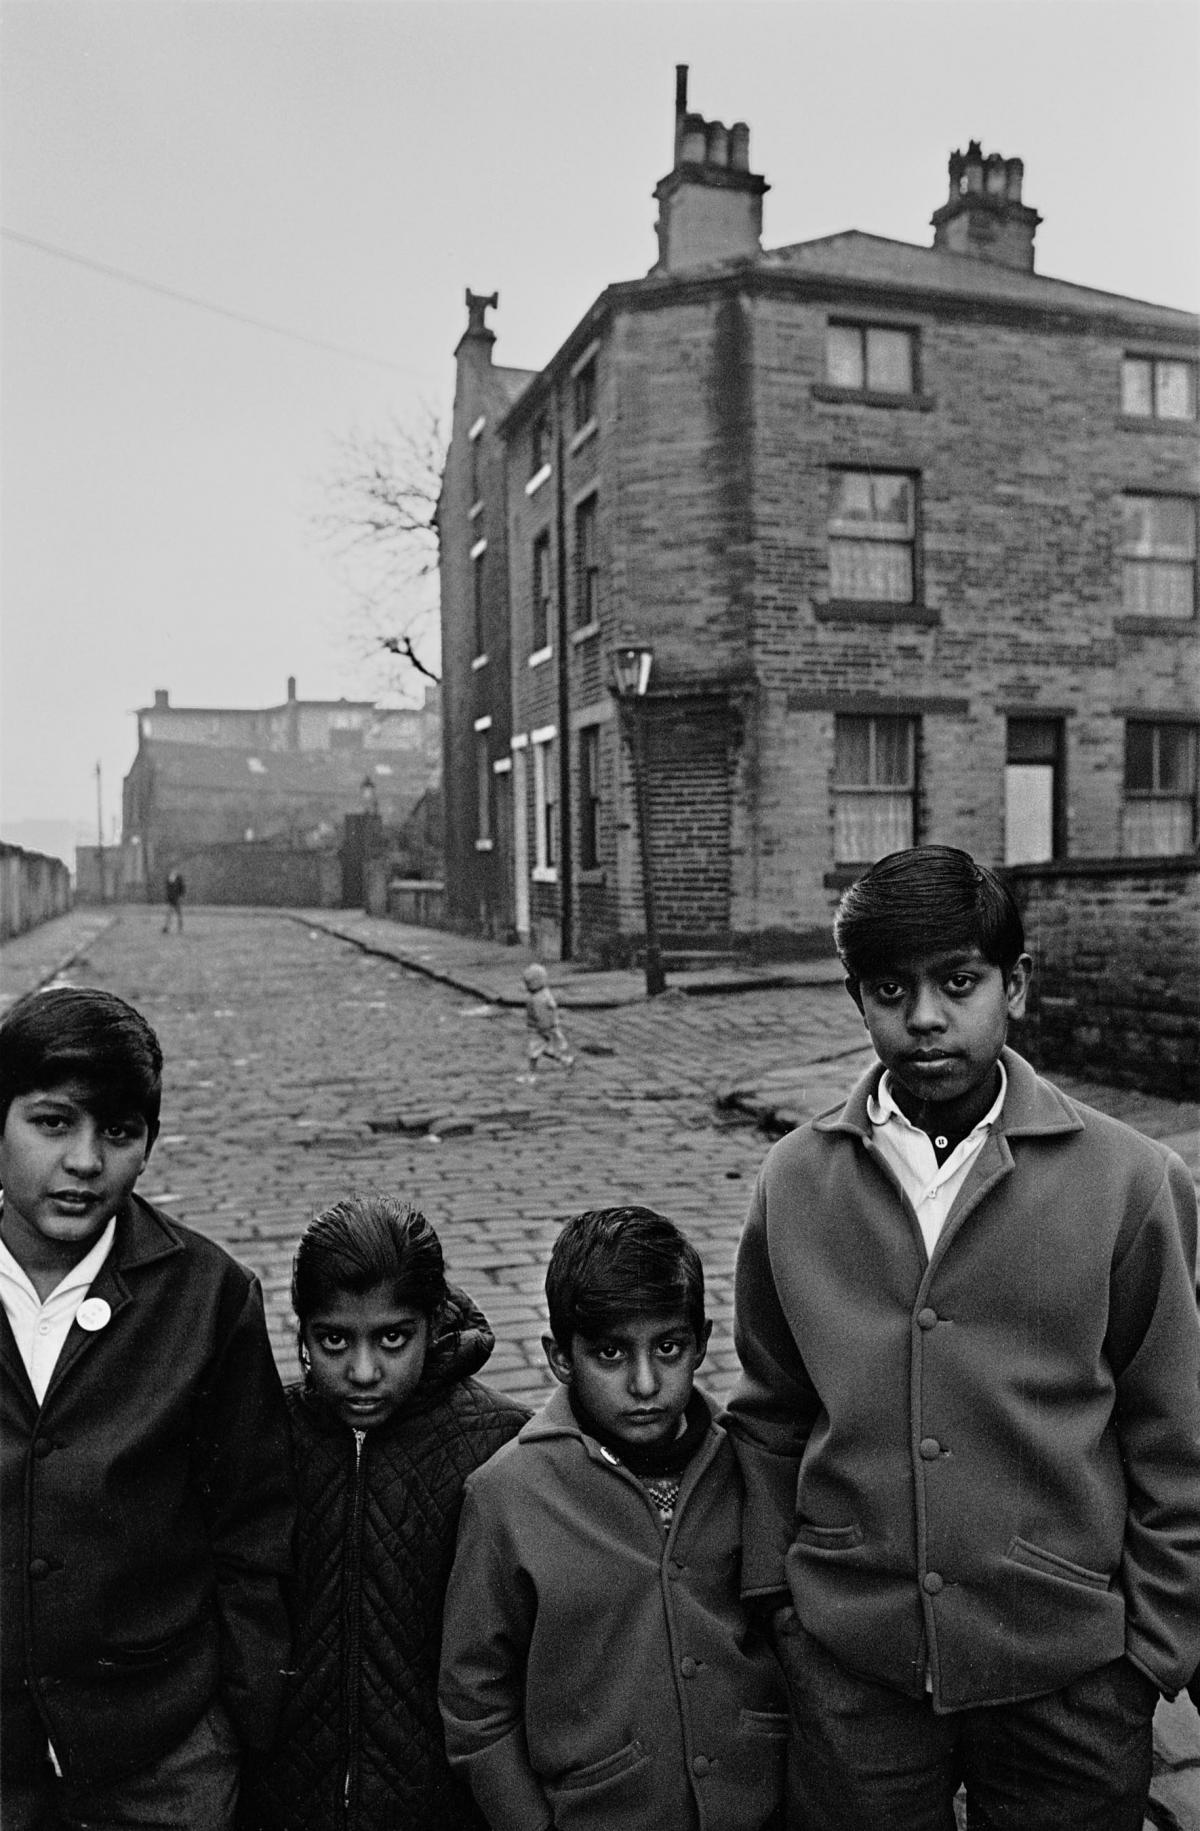 A group of schoolchildren on their way home after a day at school in Bradford